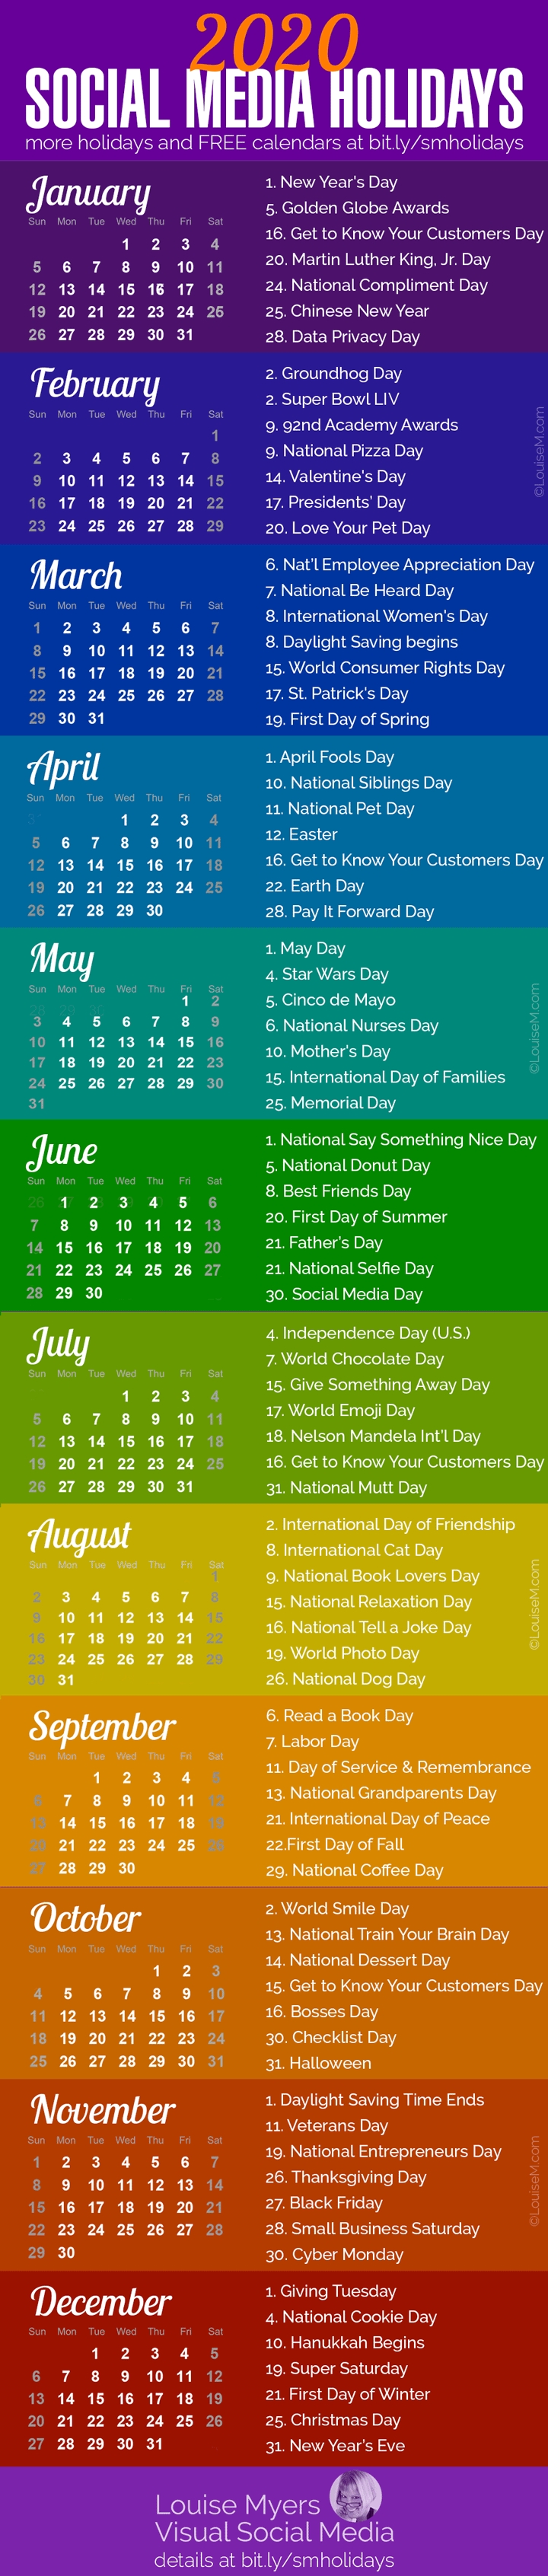 84 Social Media Holidays You Need In 2020: Indispensable!-National Calendar Holidays 2020